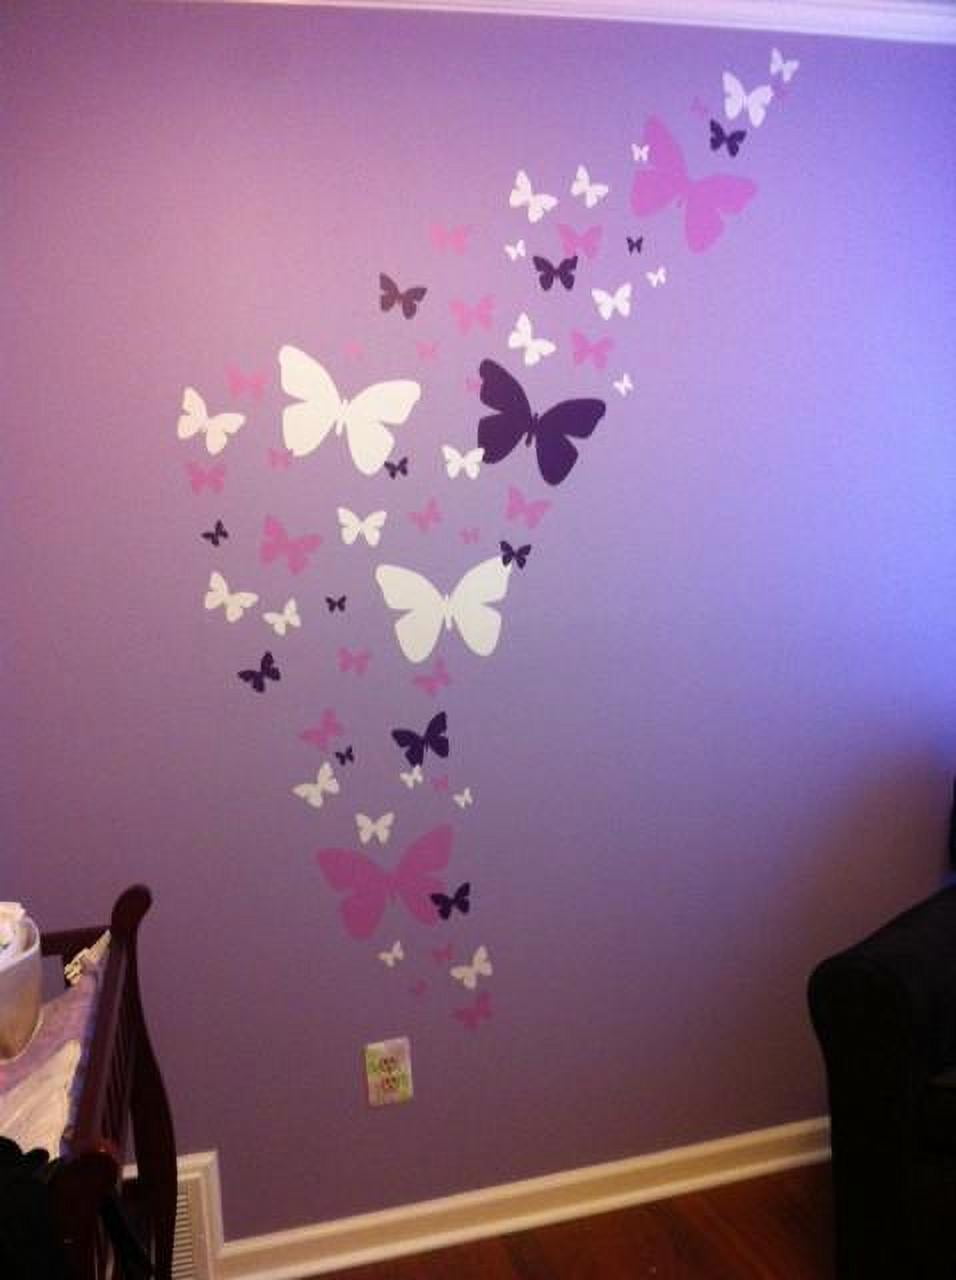 Flying Sticker Garden Decorative Wall Art Colorful Butterfly Wall Decal Watercolor Love Decals for Nursery Girl Bedroom Decoration